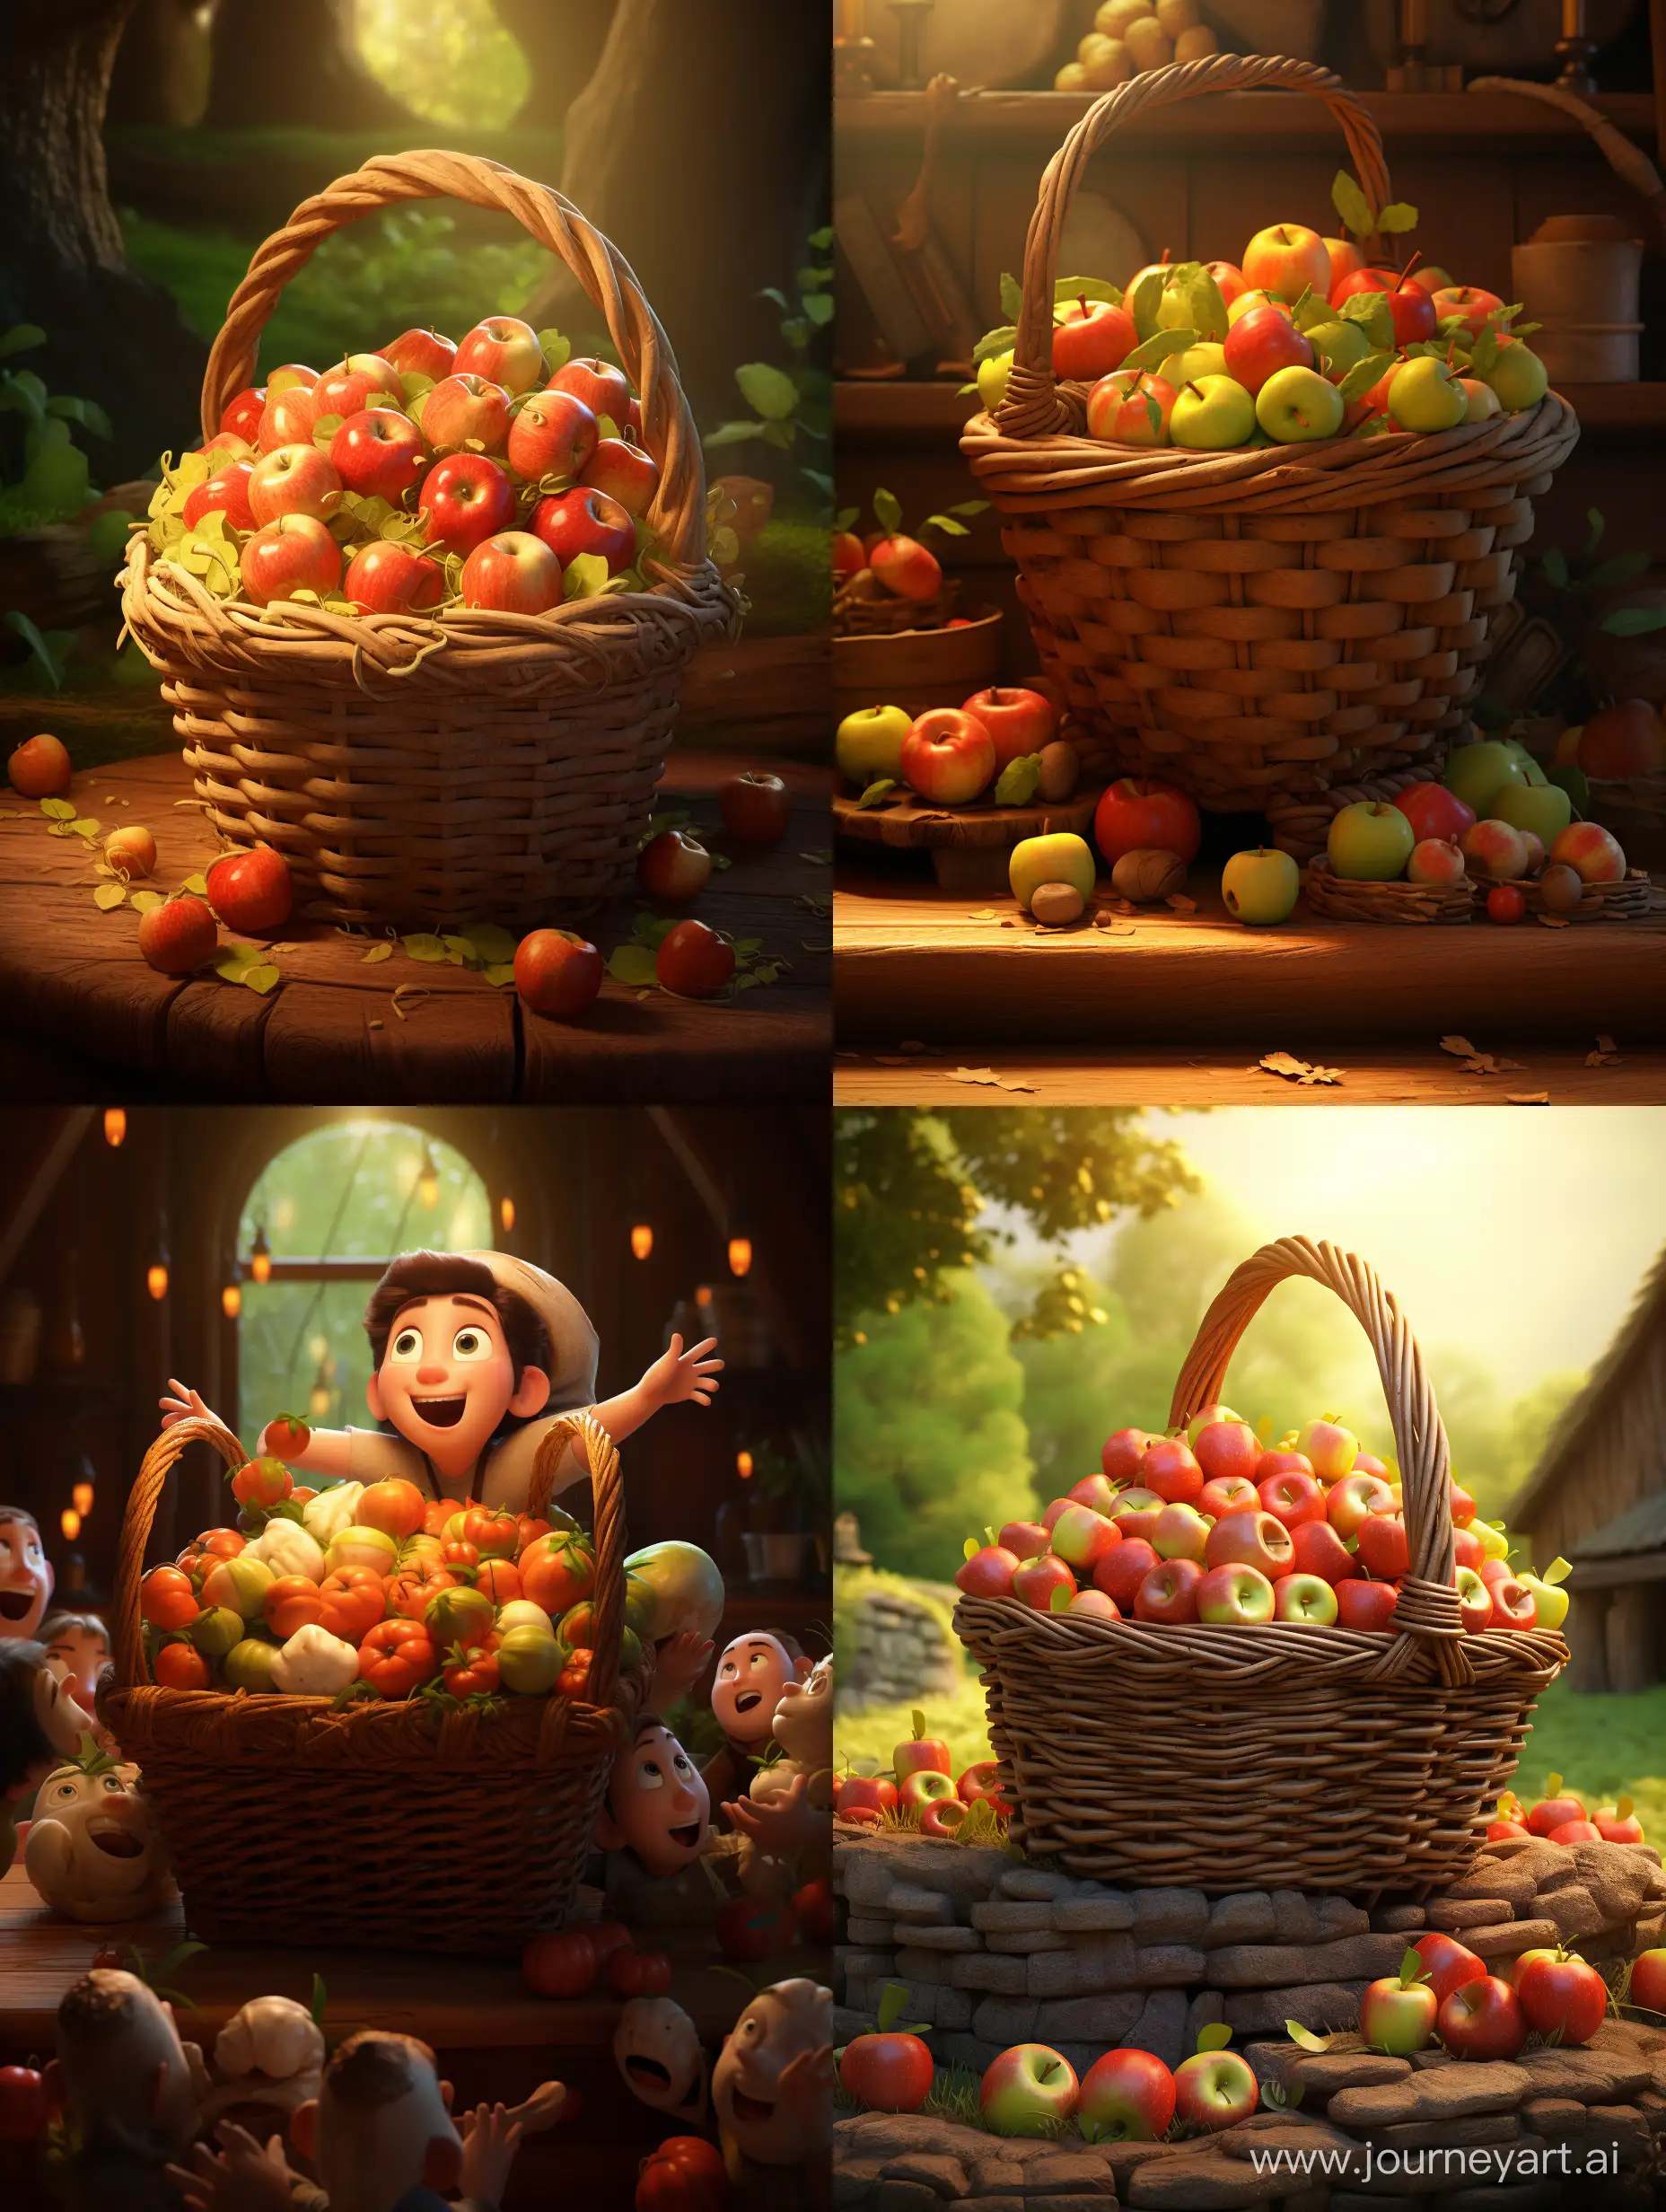 There are a lot of apples in the basket. Pixar Style